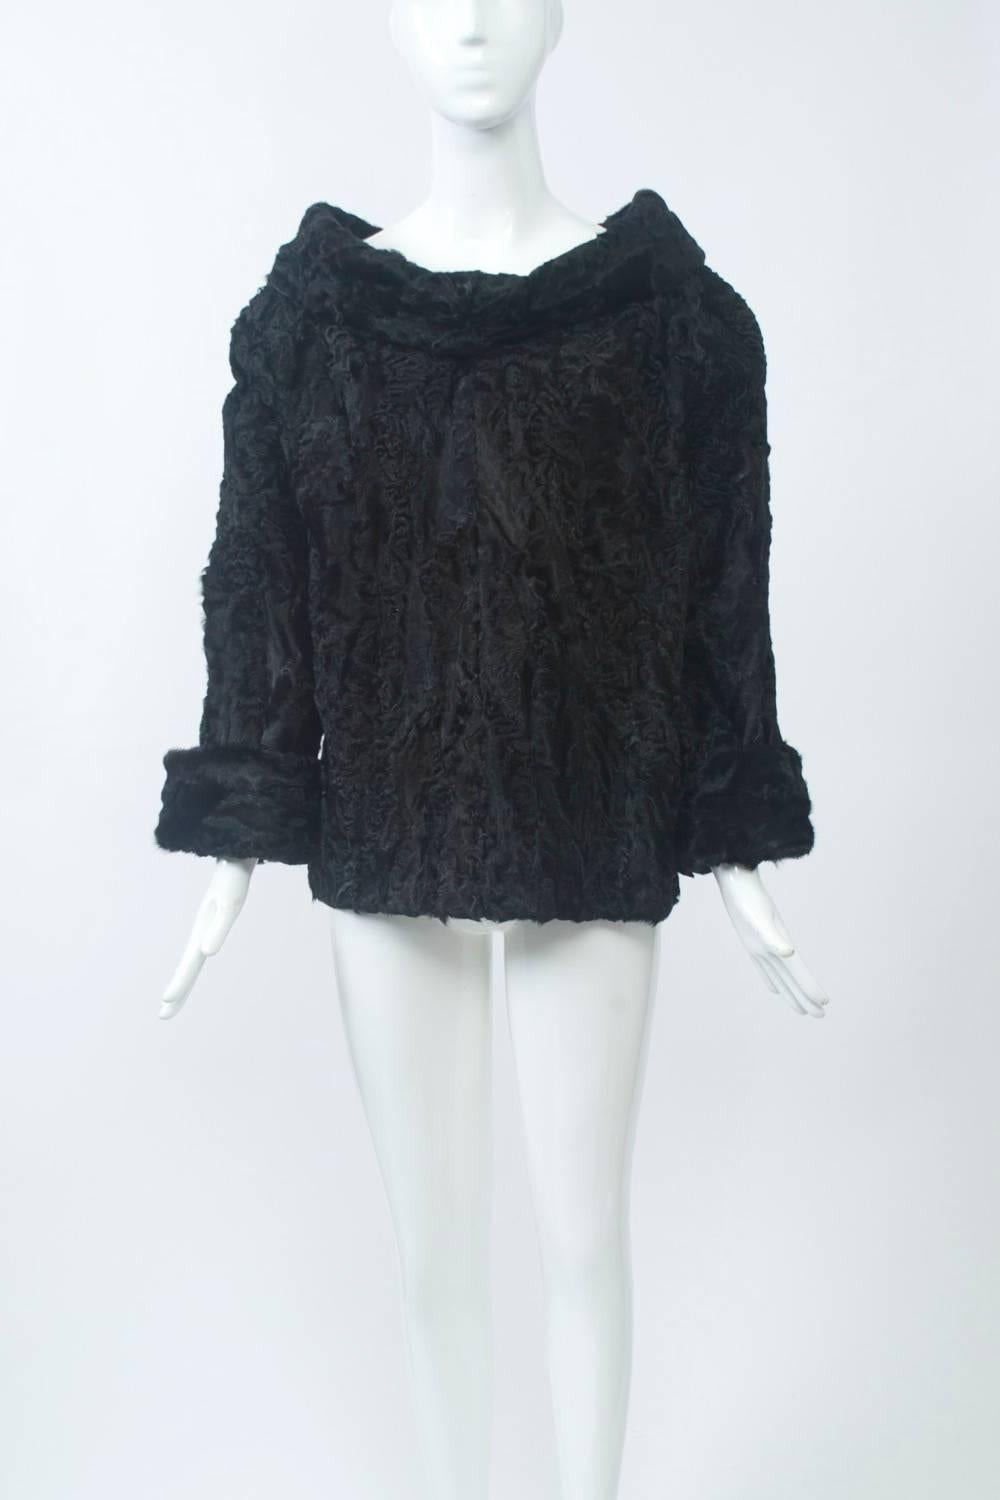 Black broadtail, custom-made tunic featuring a wide cowl collar and turned back cuffs. Slips over the head. A truly unique piece to pair with anything from jeans to a long skirt or more formal pants. Approximate size Small.